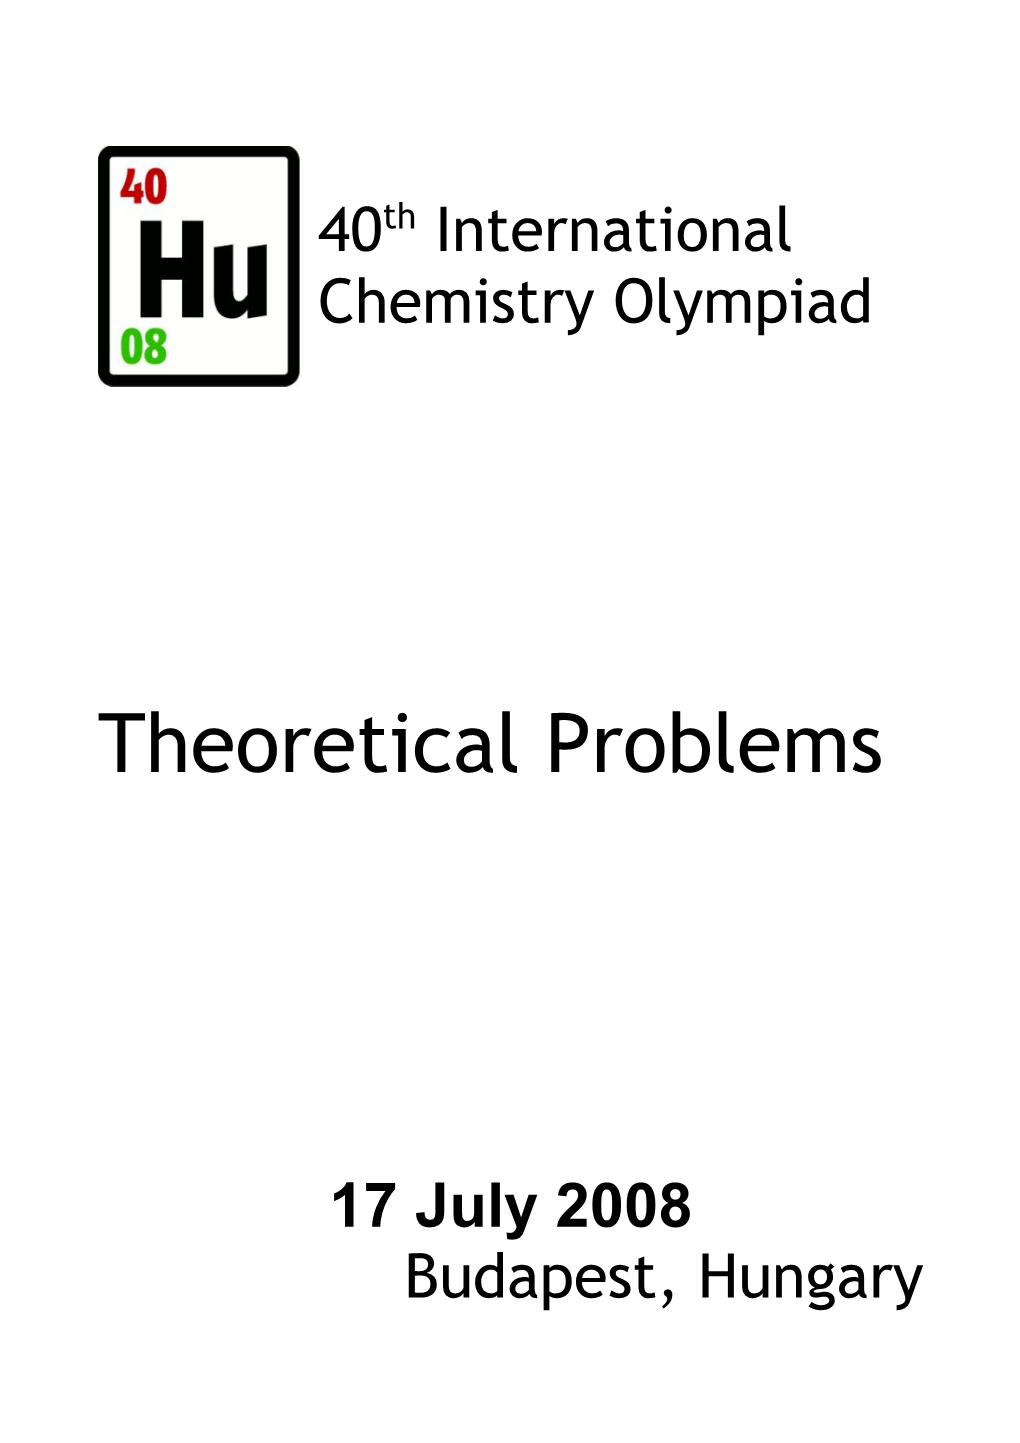 Theoretical Problems Of The 40Th Icho